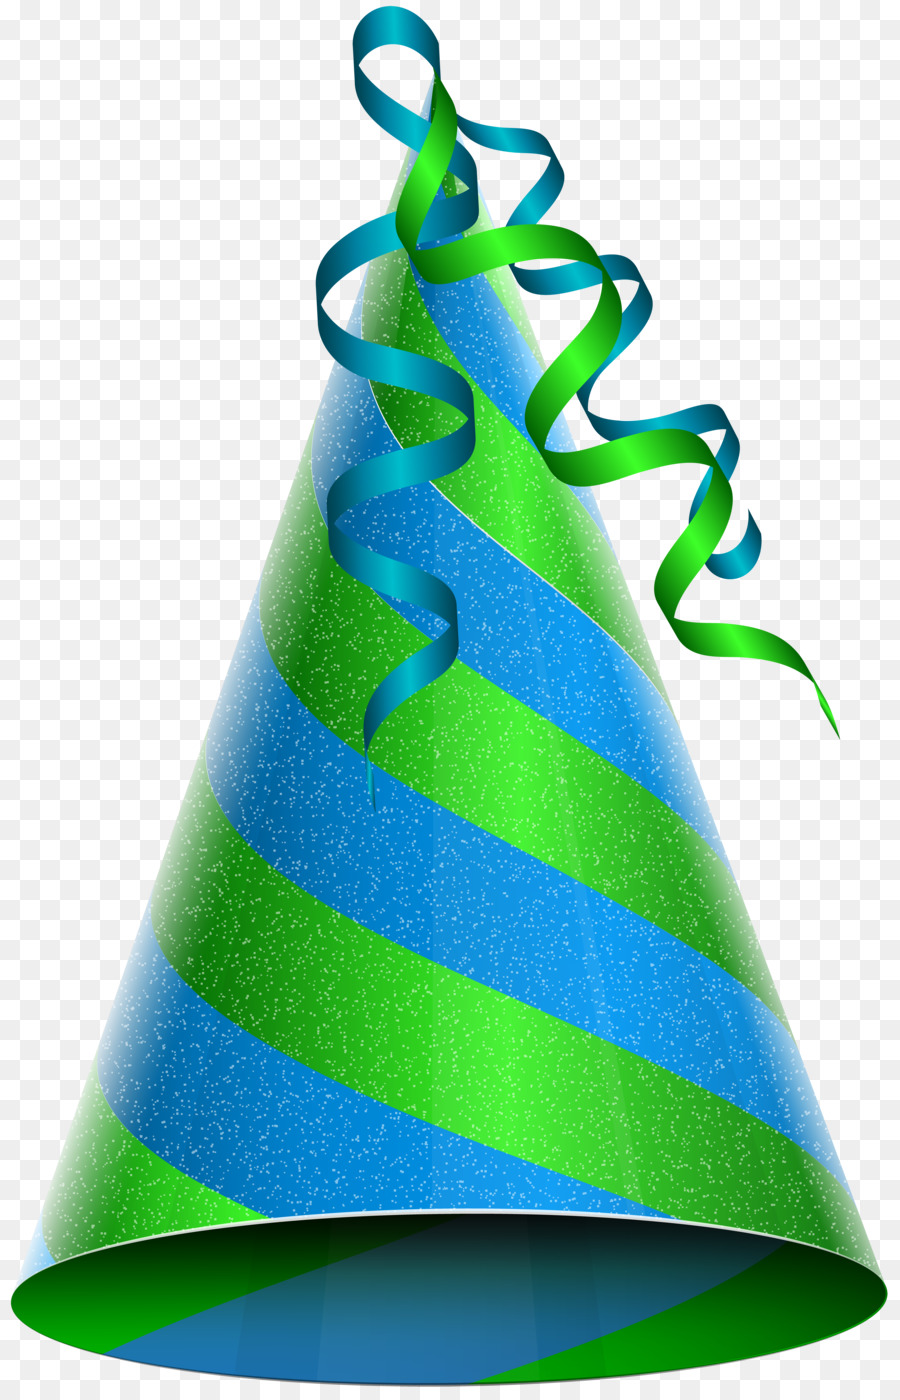 Party hat Birthday cake Happy Birthday to You Clip art - blue png download - 5157*8000 - Free Transparent Party Hat png Download.